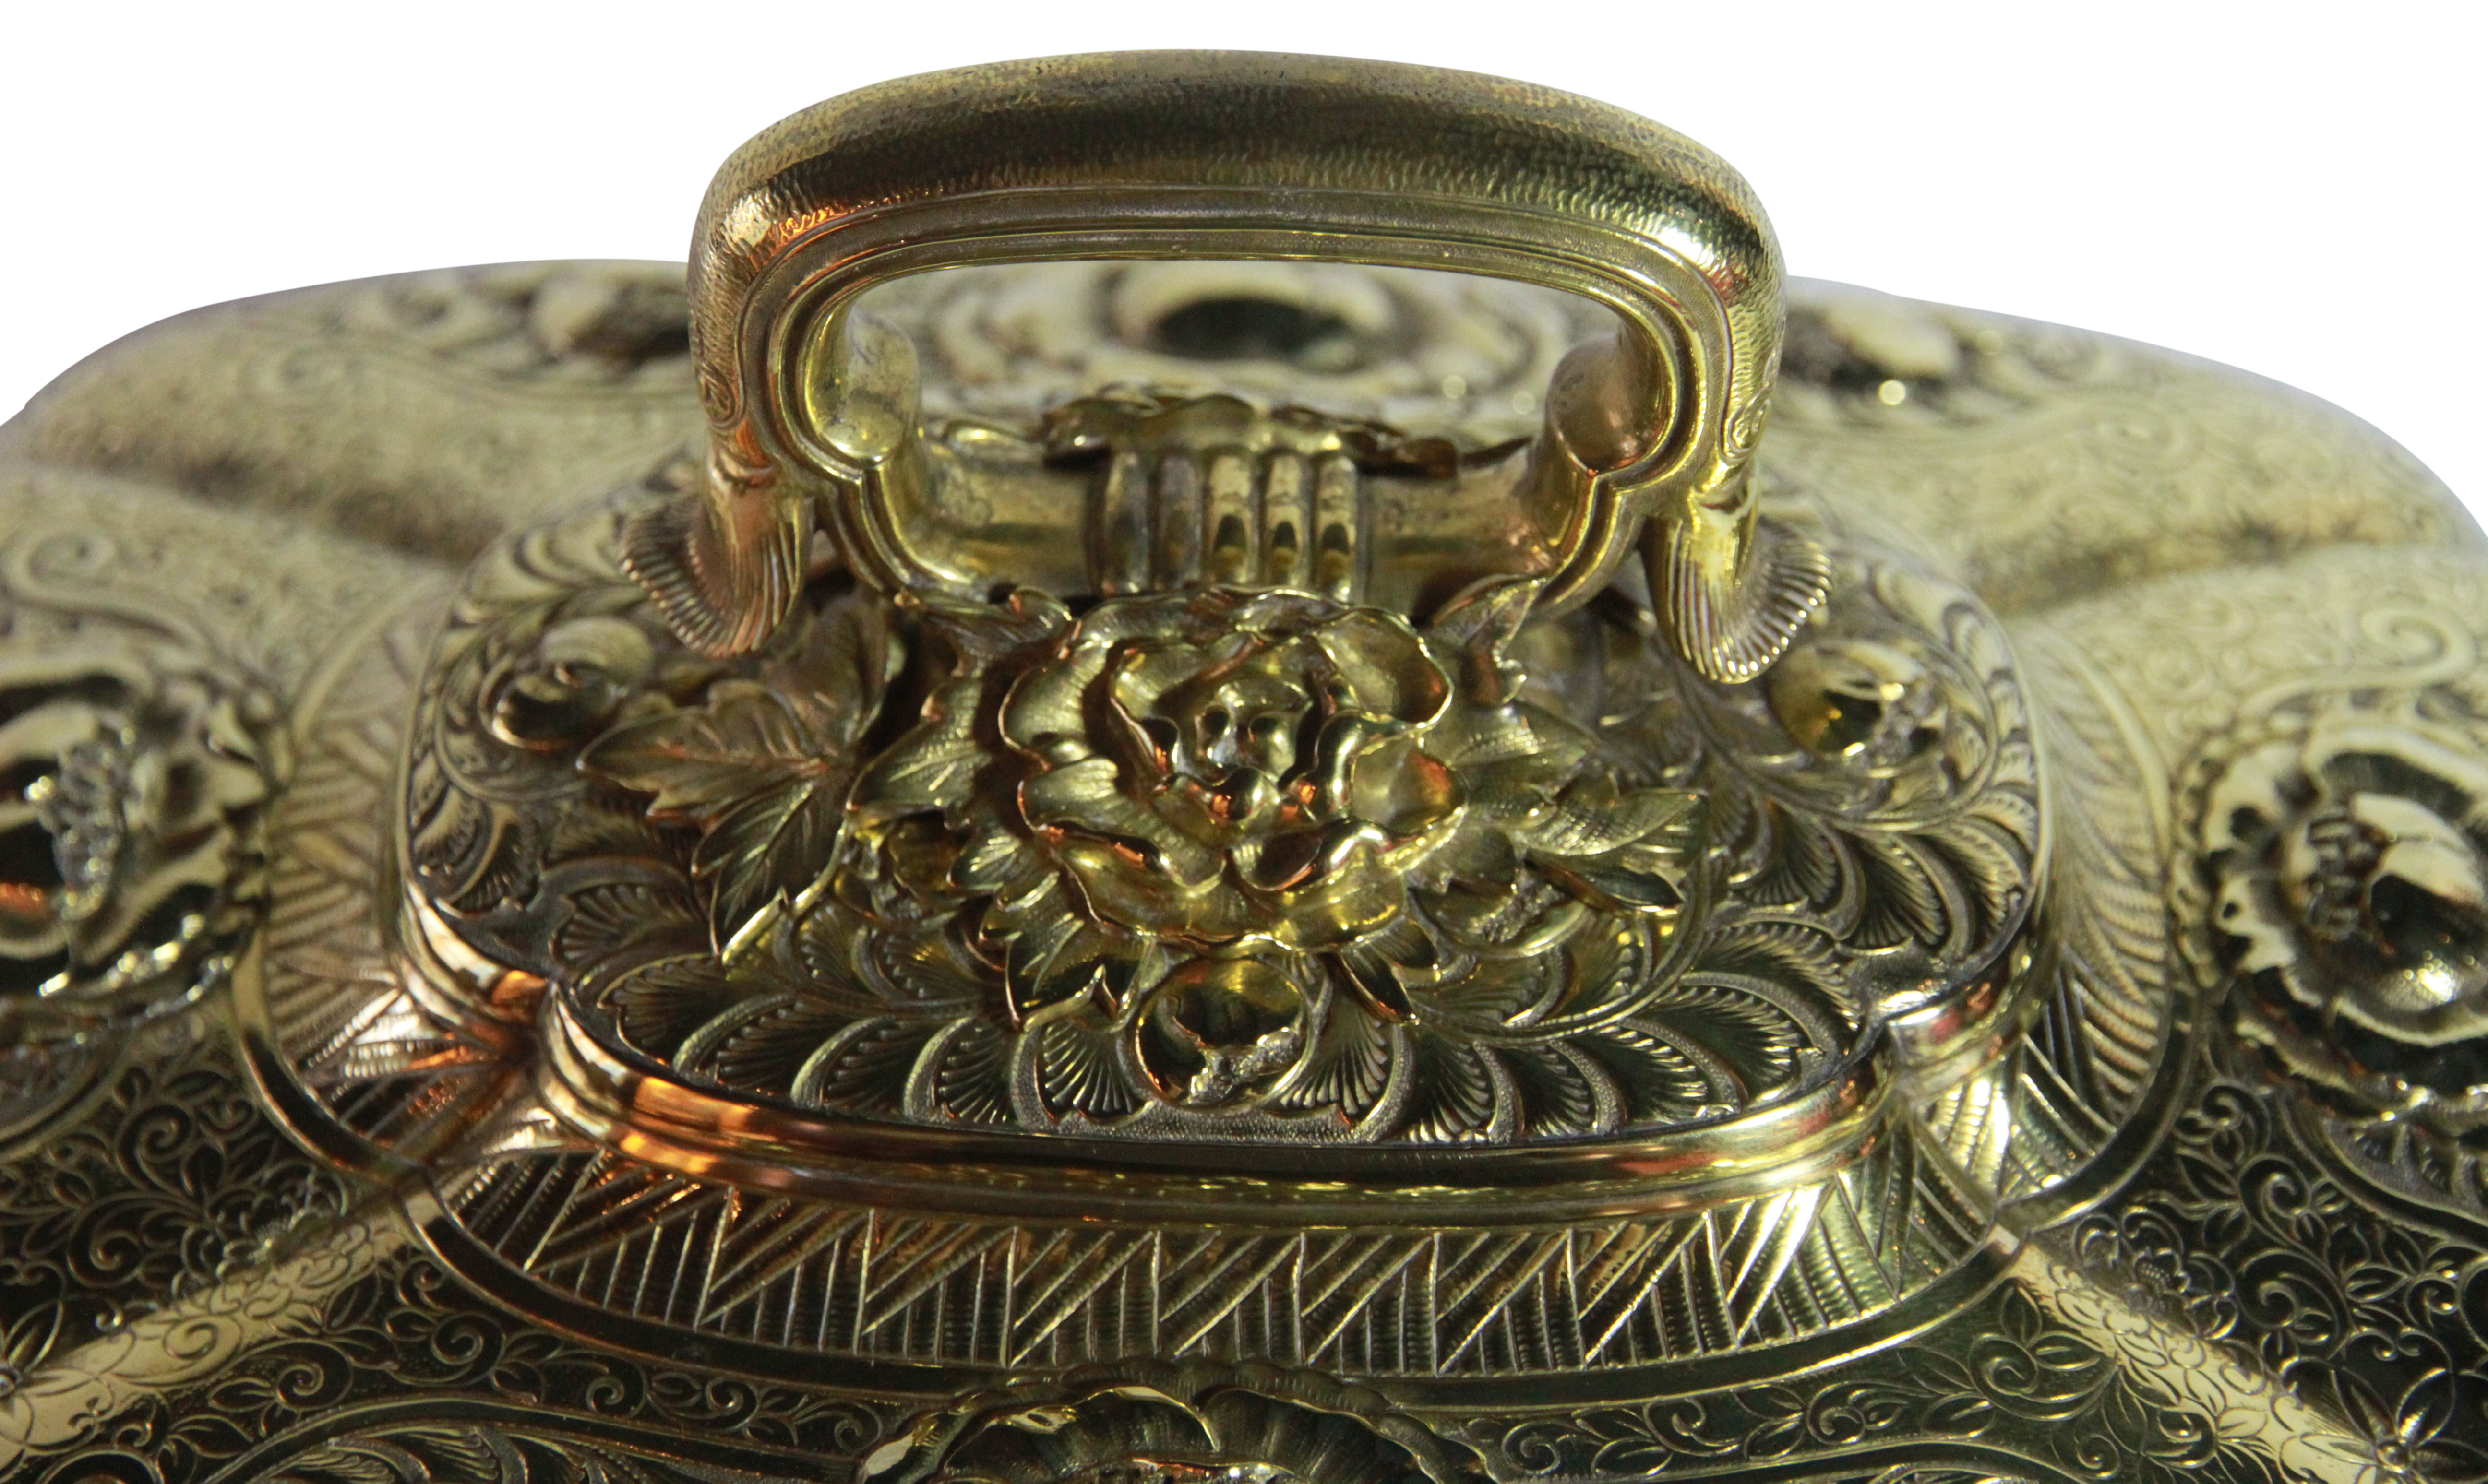 A superb American silver gilt tureen & cover decorated in the Chinese Chippendale taste amongst - Image 4 of 6